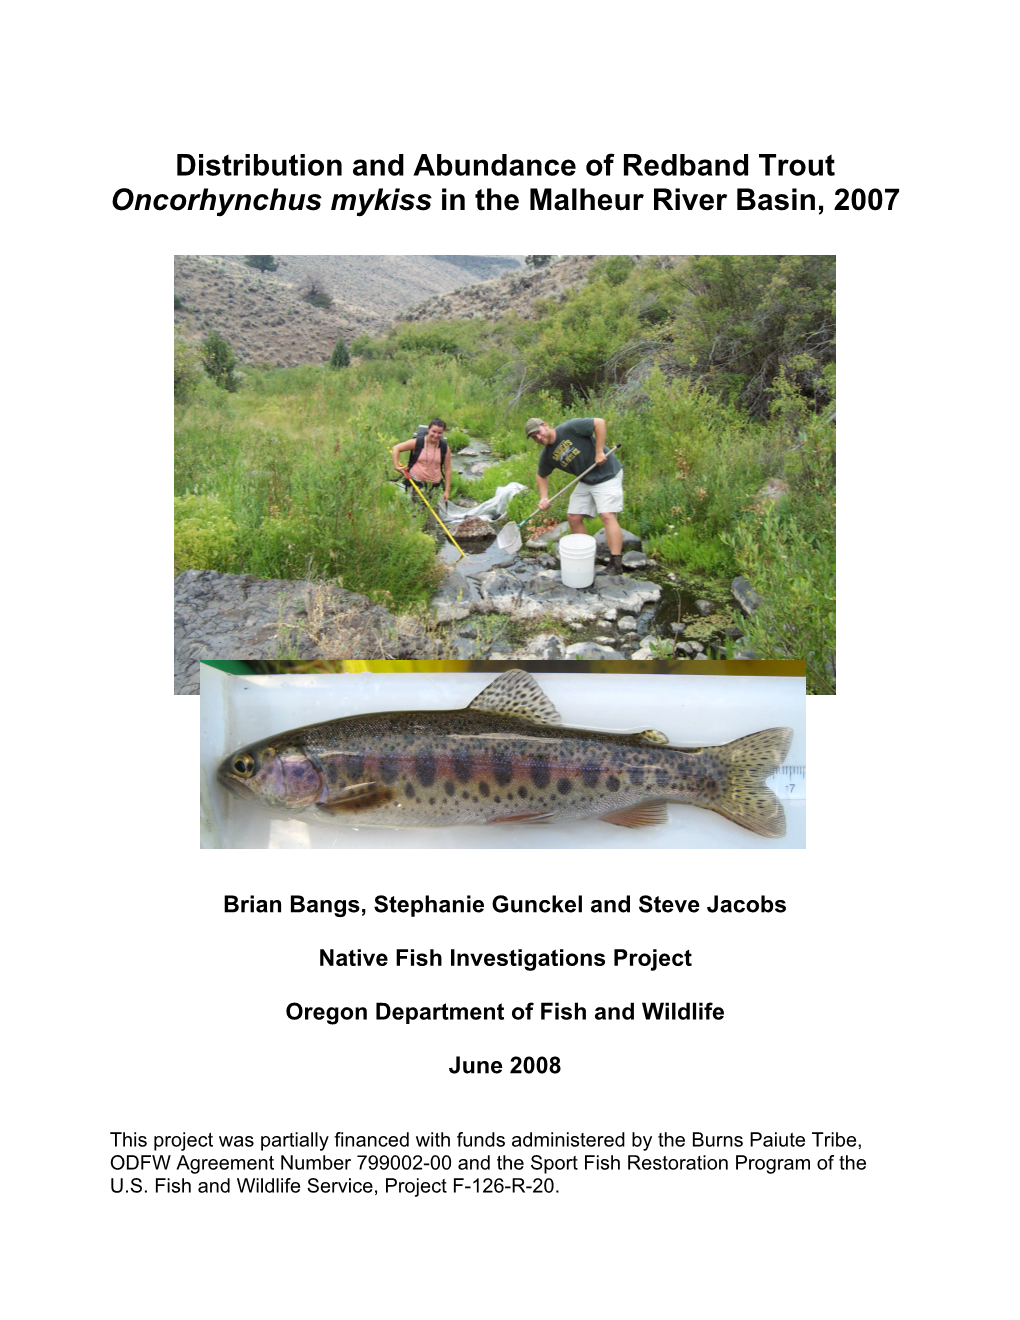 Distribution and Abundance of Redband Trout Oncorhynchus Mykiss in the Malheur River Basin, 2007